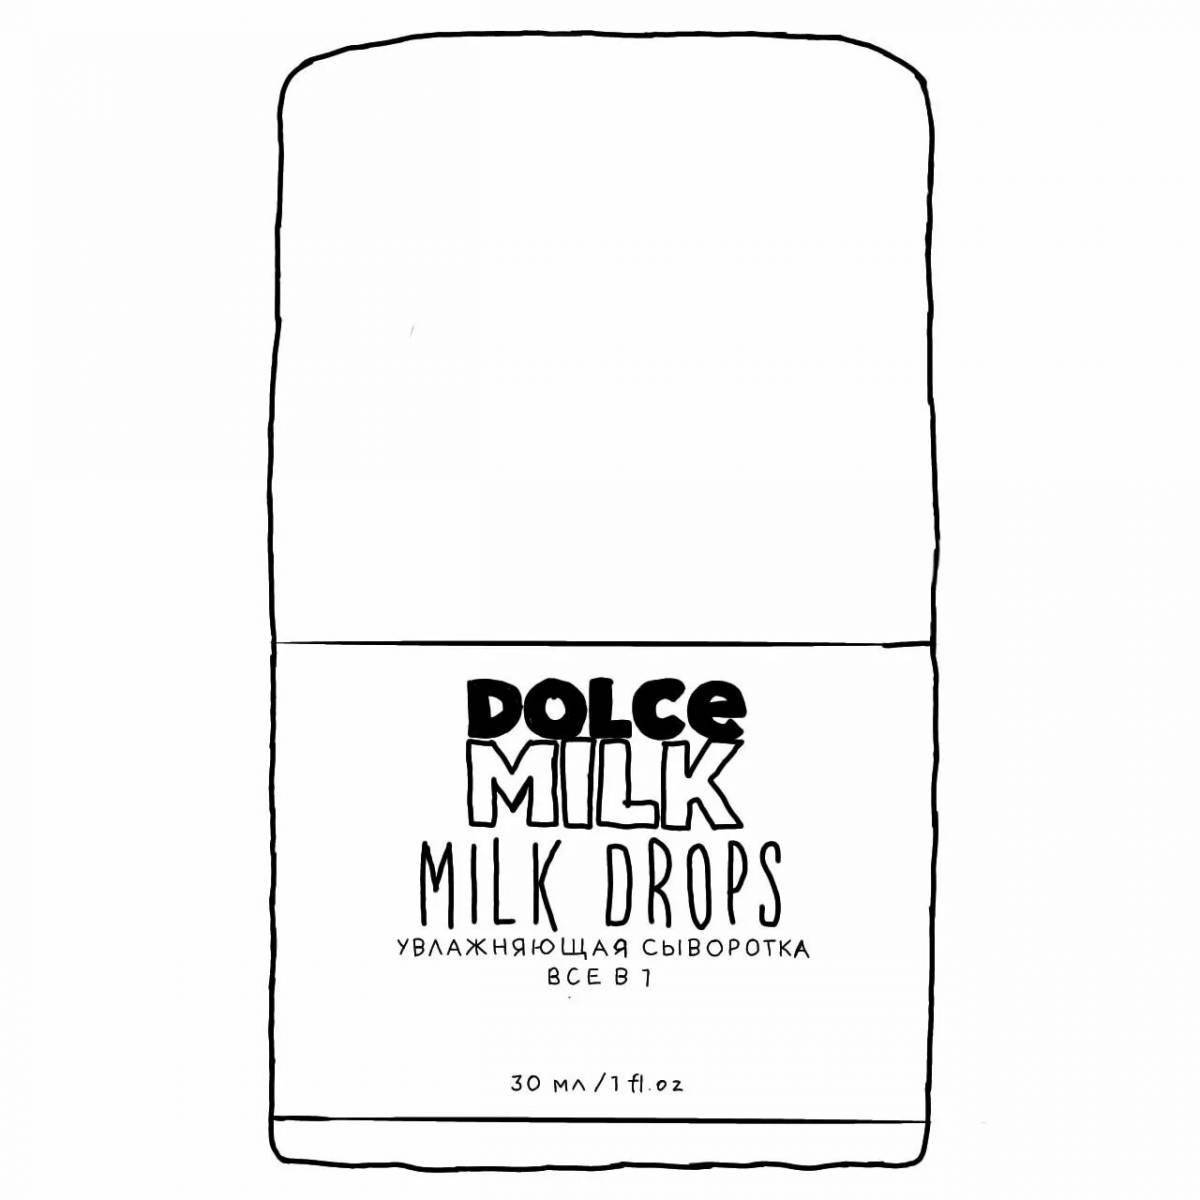 Dolce milk paper coloring page live